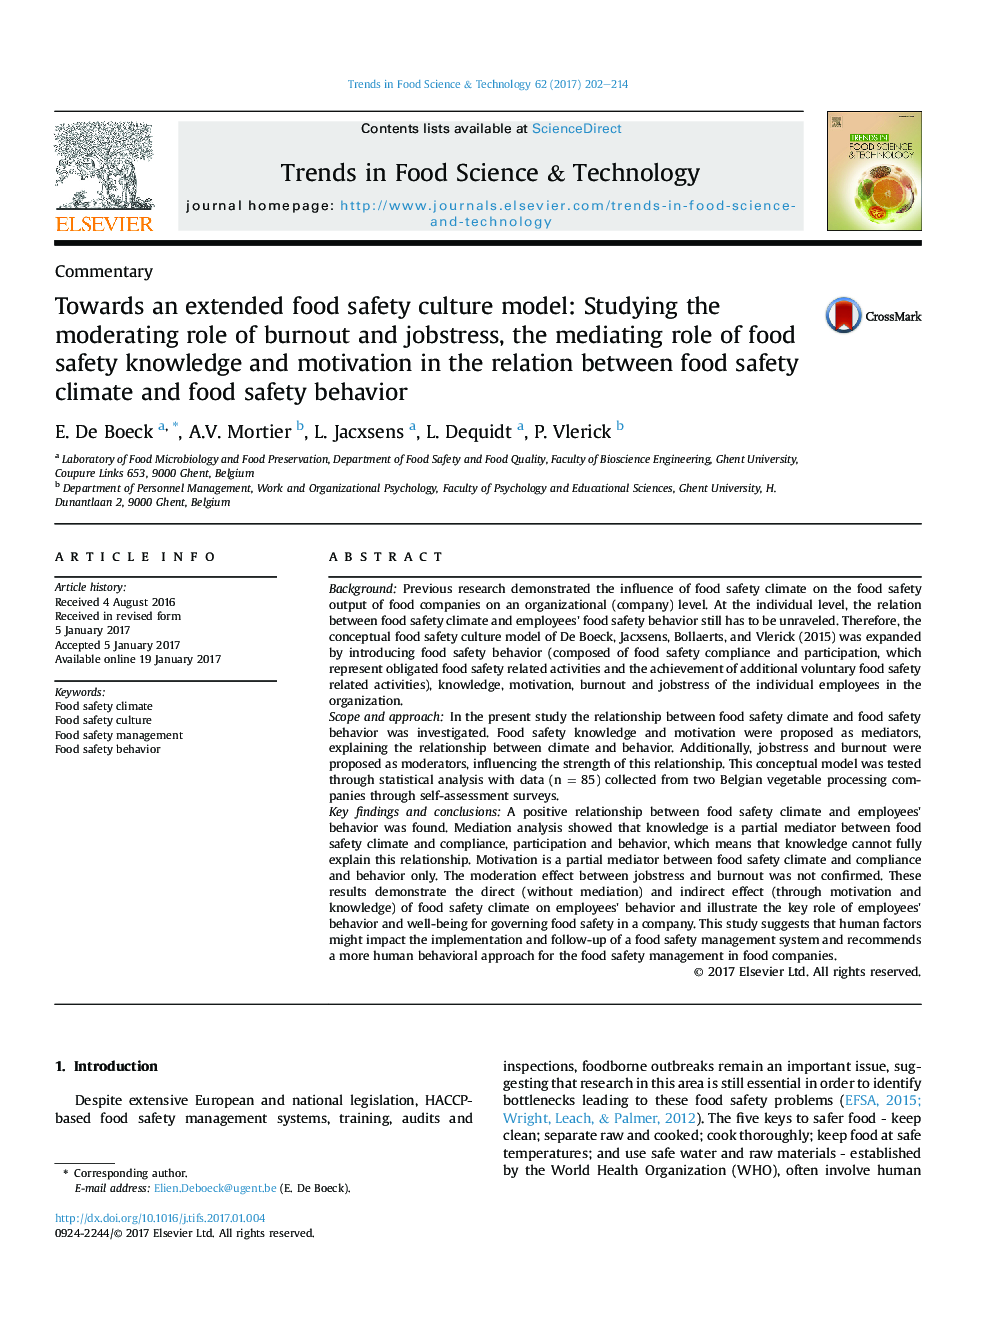 CommentaryTowards an extended food safety culture model: Studying the moderating role of burnout and jobstress, the mediating role of food safety knowledge and motivation in the relation between food safety climate and food safety behavior